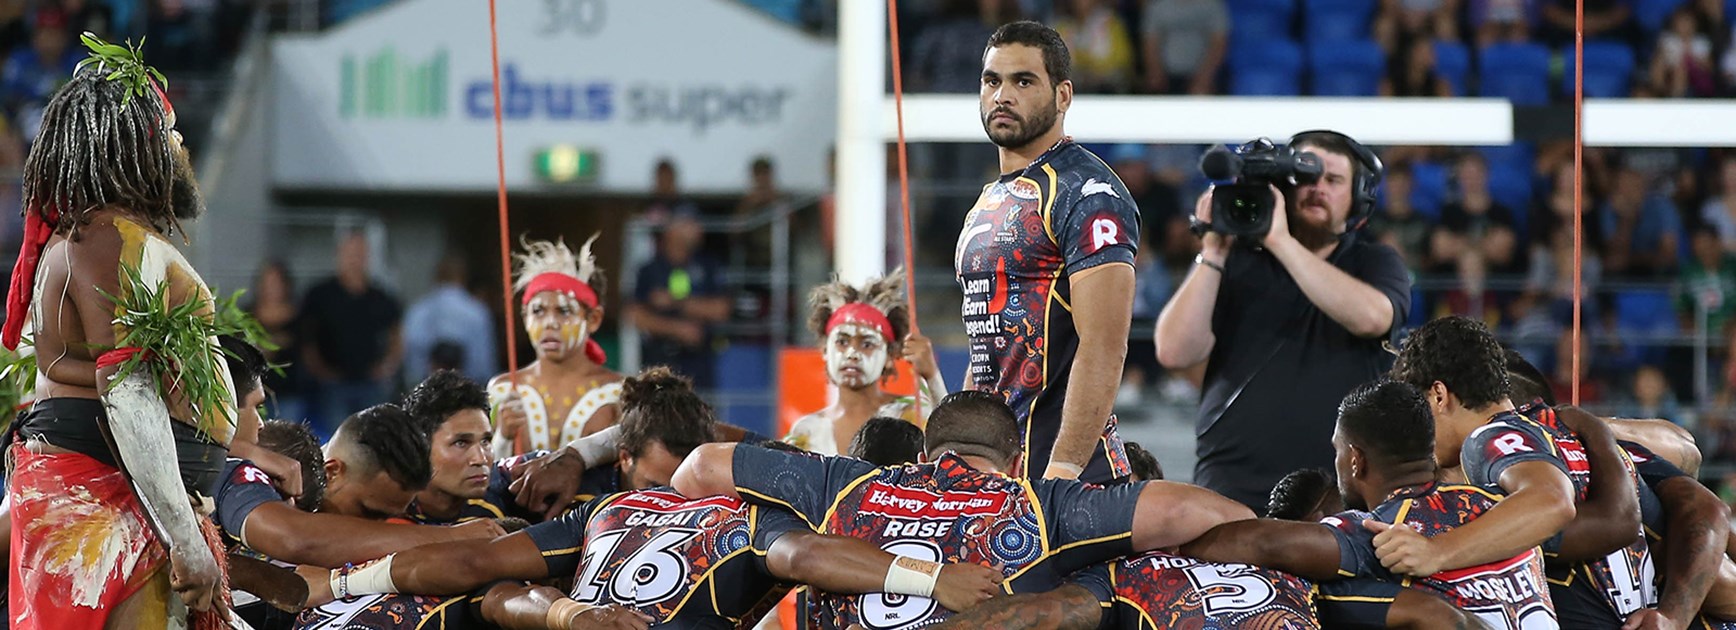 Kyle Turner learned a lot from Greg Inglis and others during his time in the 2015 Indigenous All Stars.